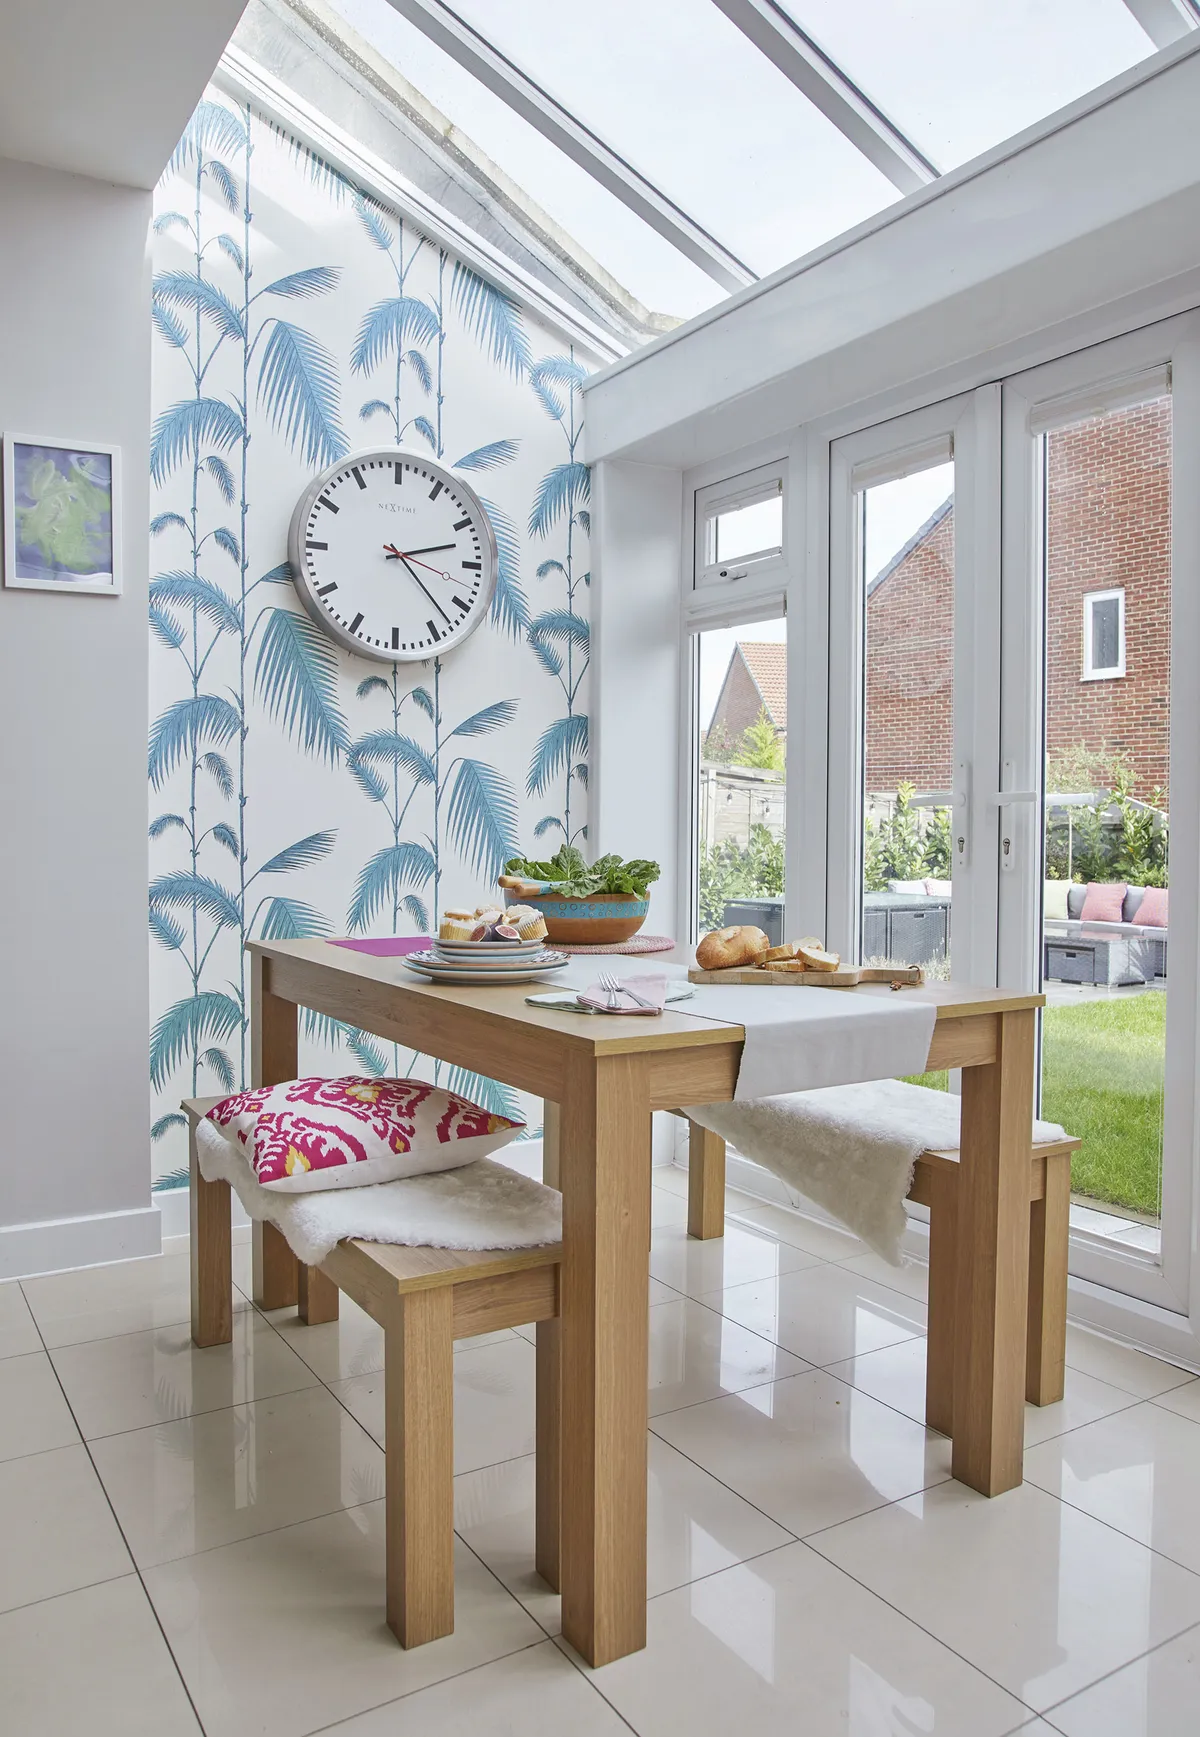 ‘I bought this Cole & Son wallpaper from eBay but there was only one roll. I wasn’t sure where to use it, and initially thought it might go in the bathroom, but it works really well here. We bought the dining set off the previous owners as it works well in the space’